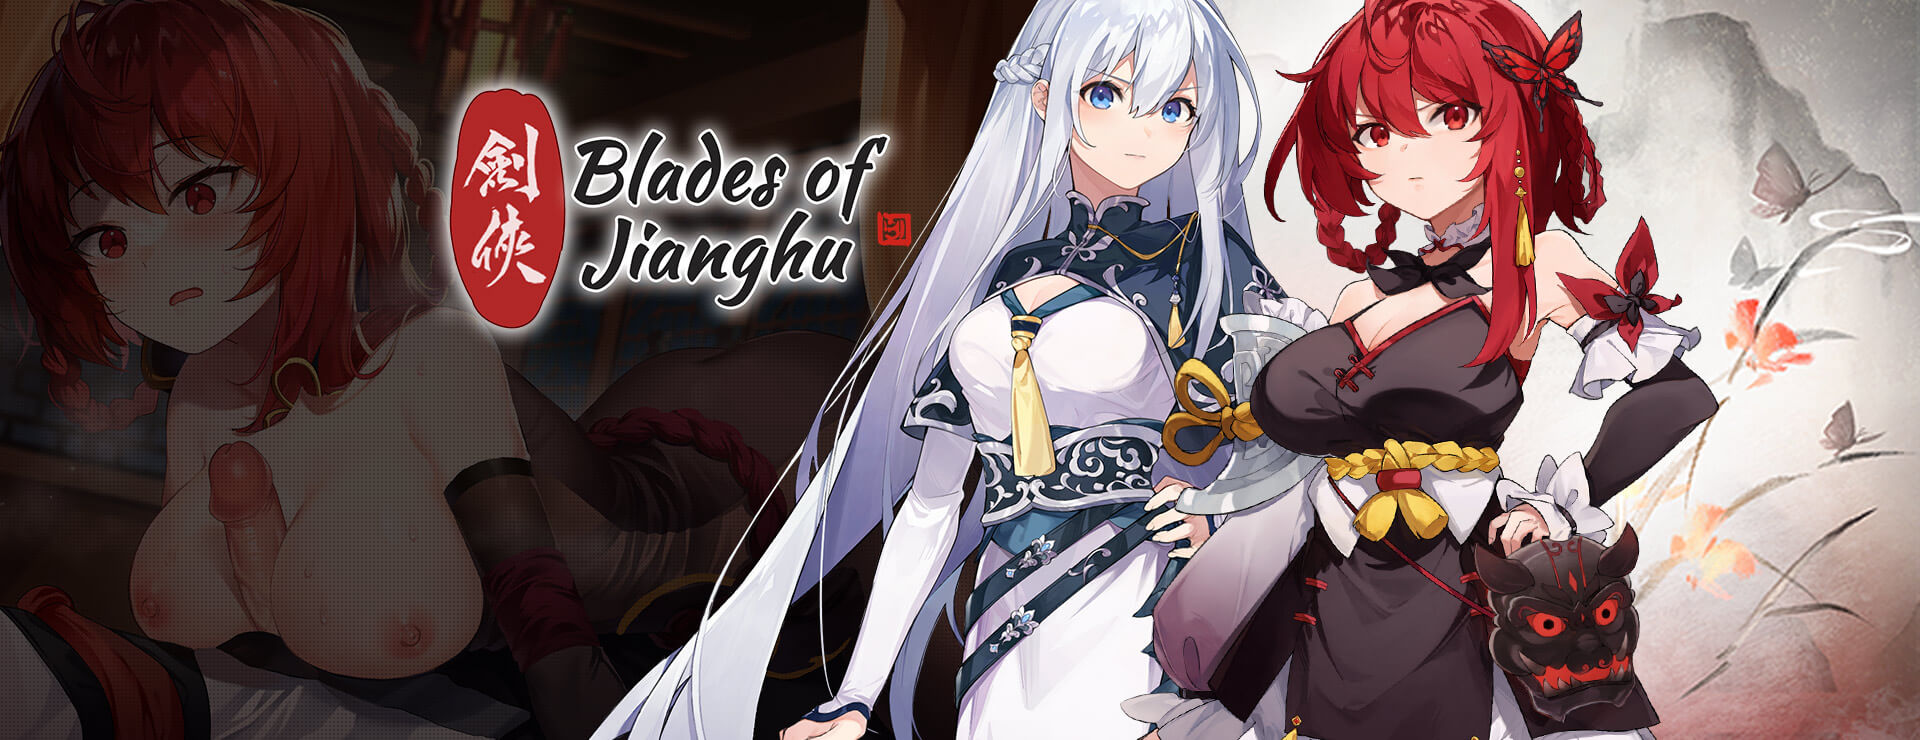 Blades of Jianghu: Ballad of Wind and Dust - RPG Jeu